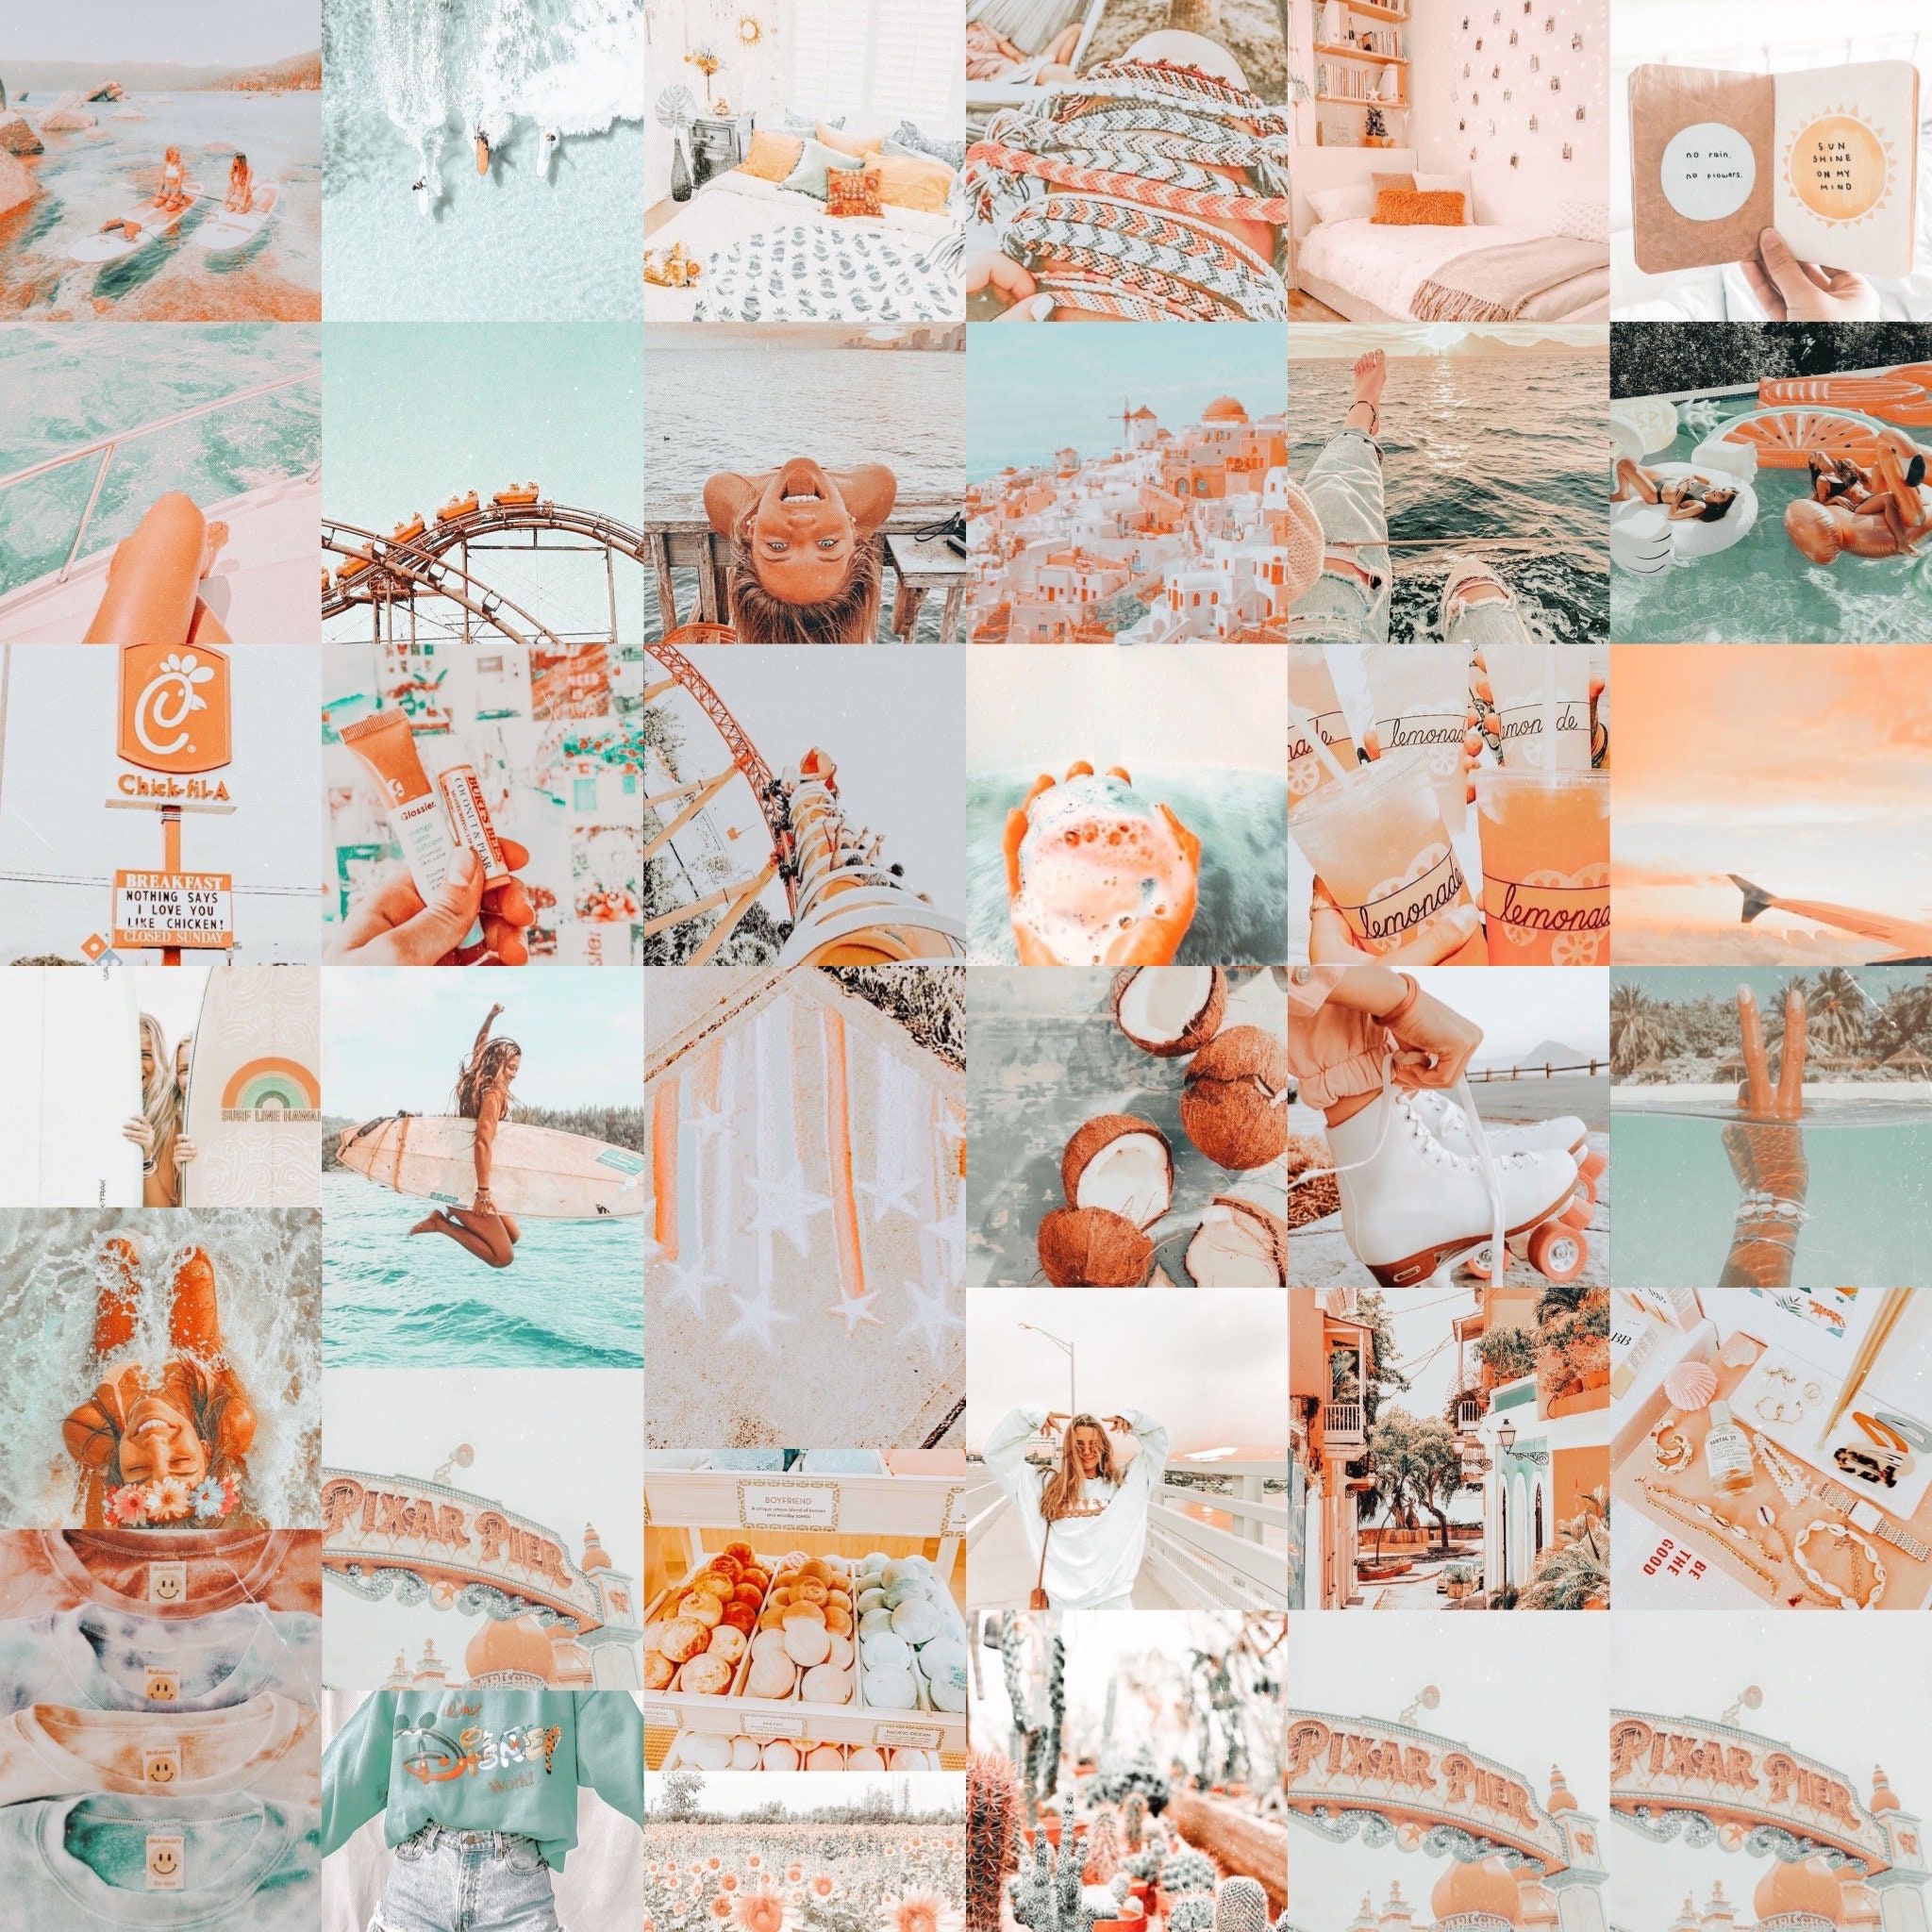 A collage of photos in a peach and blue aesthetic. - VSCO, teal